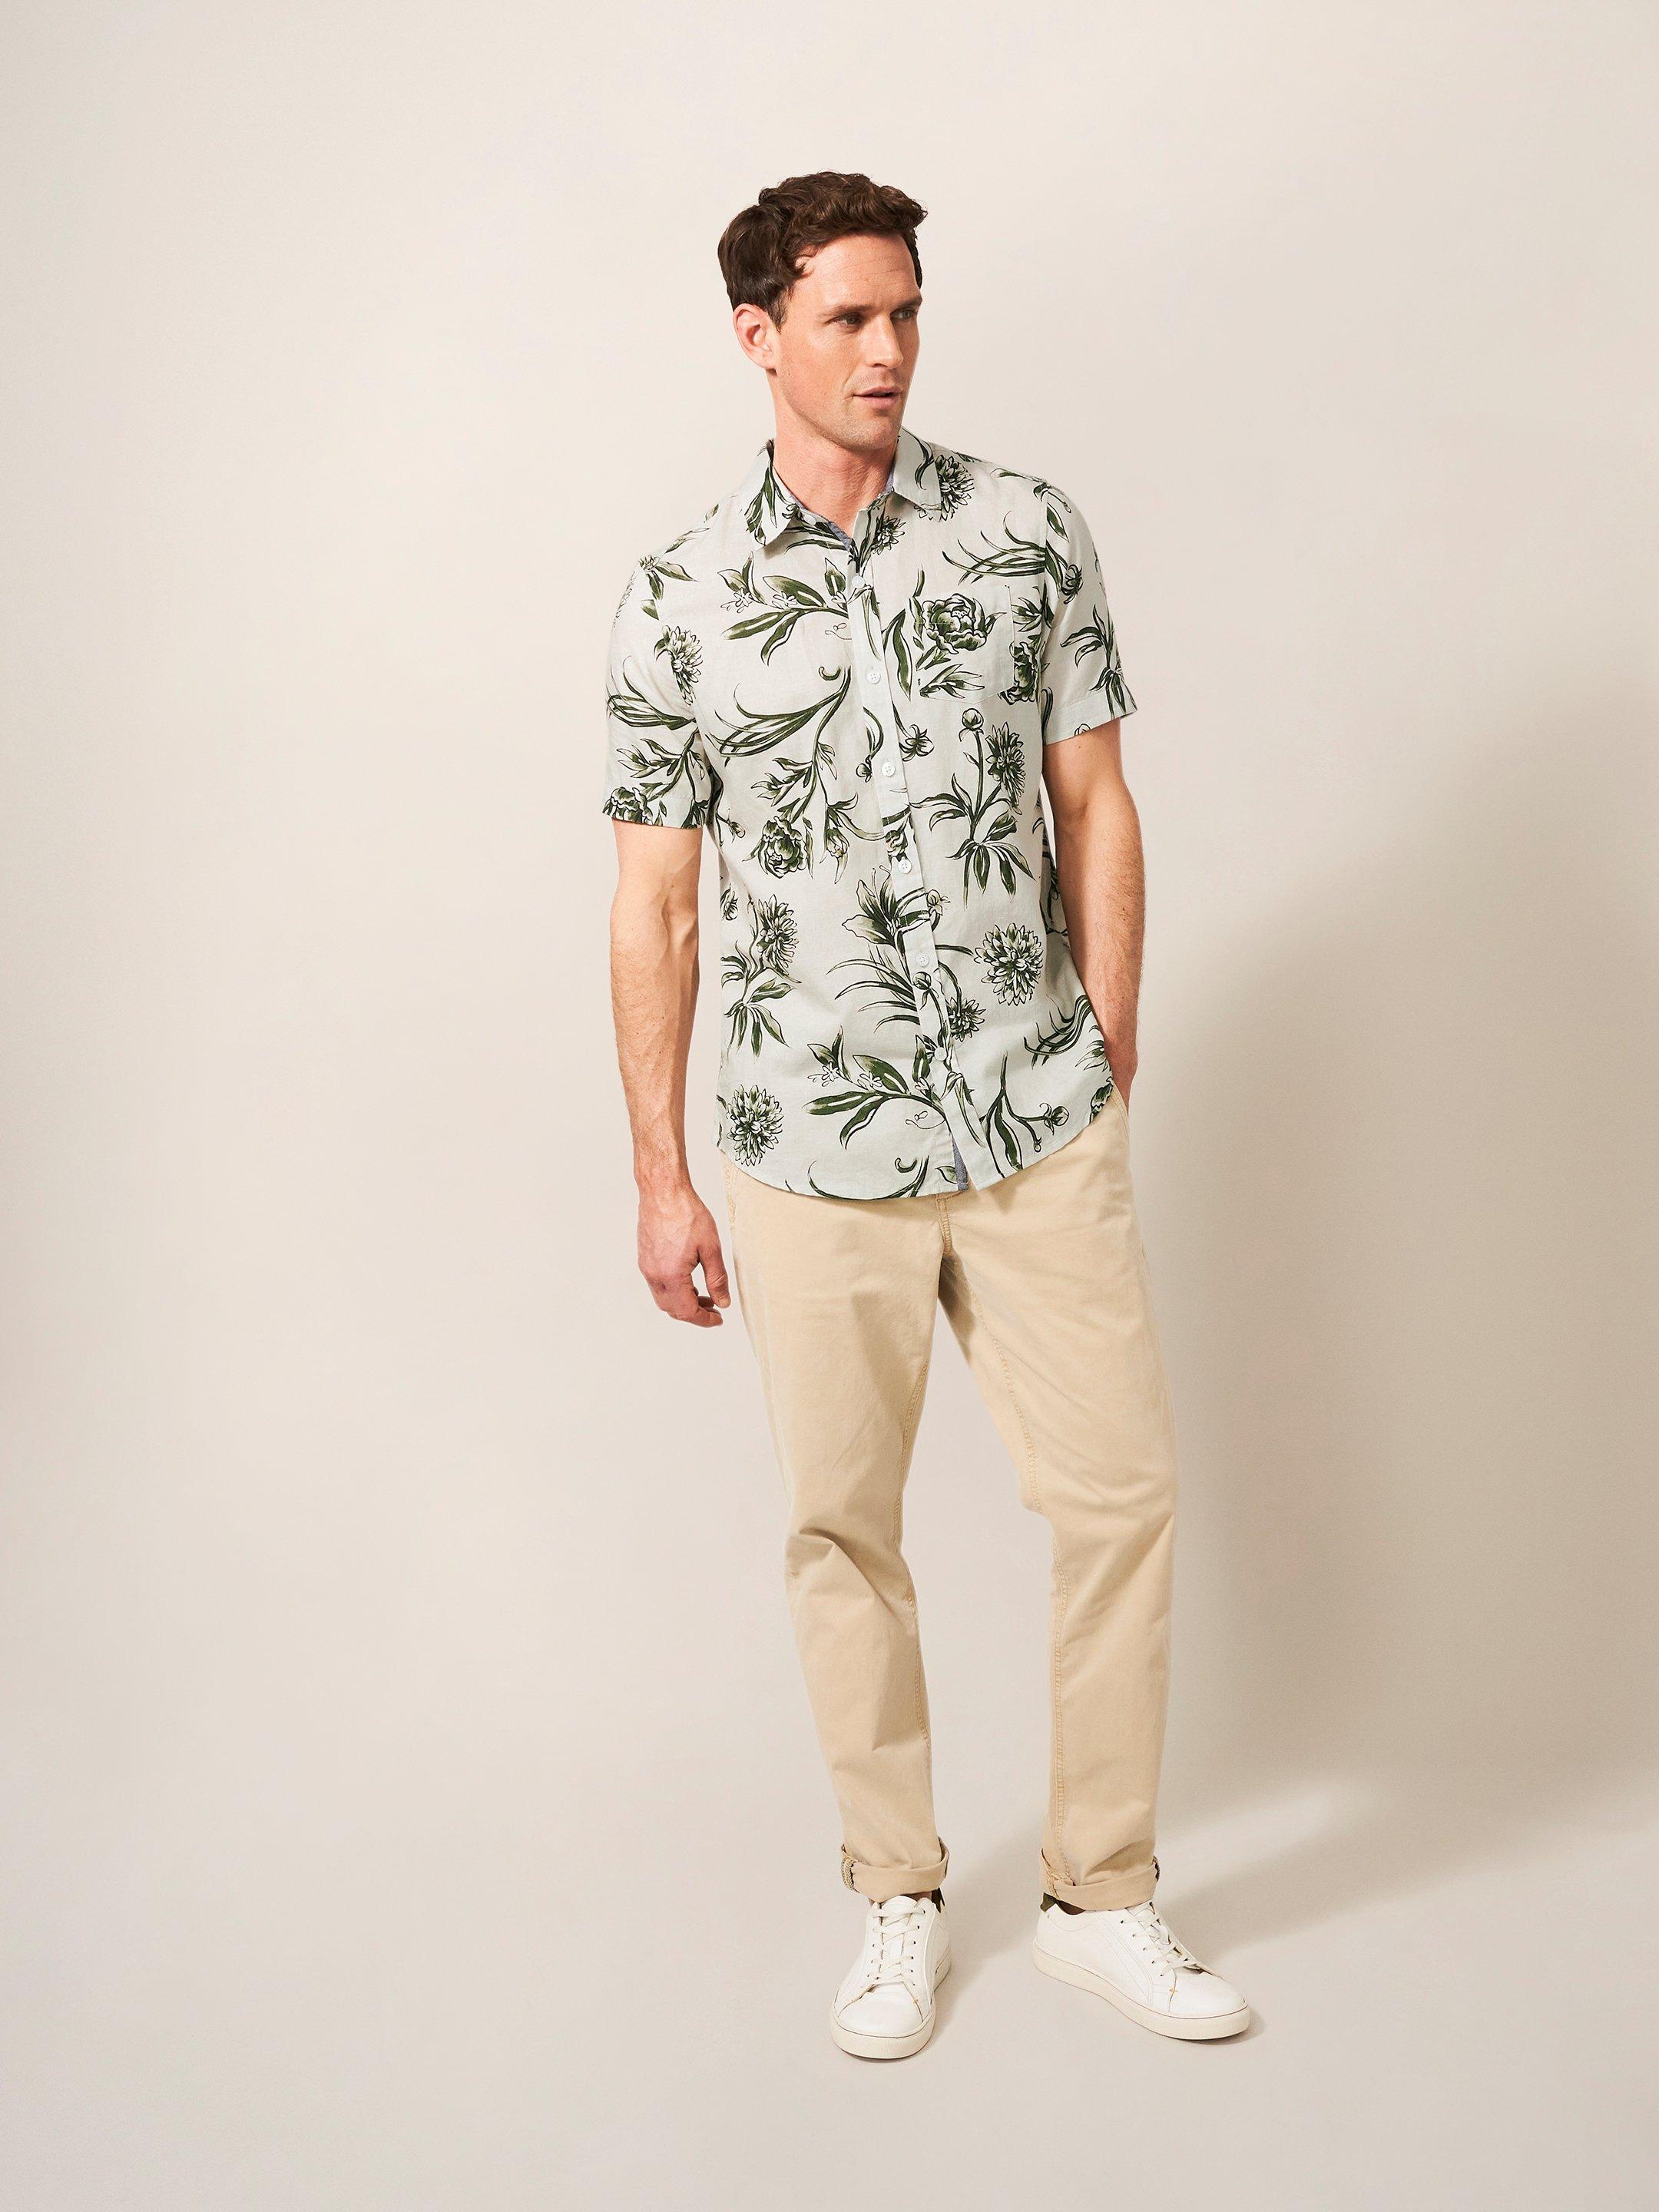 Painted Floral Shirt in KHAKI GRN - MODEL FRONT